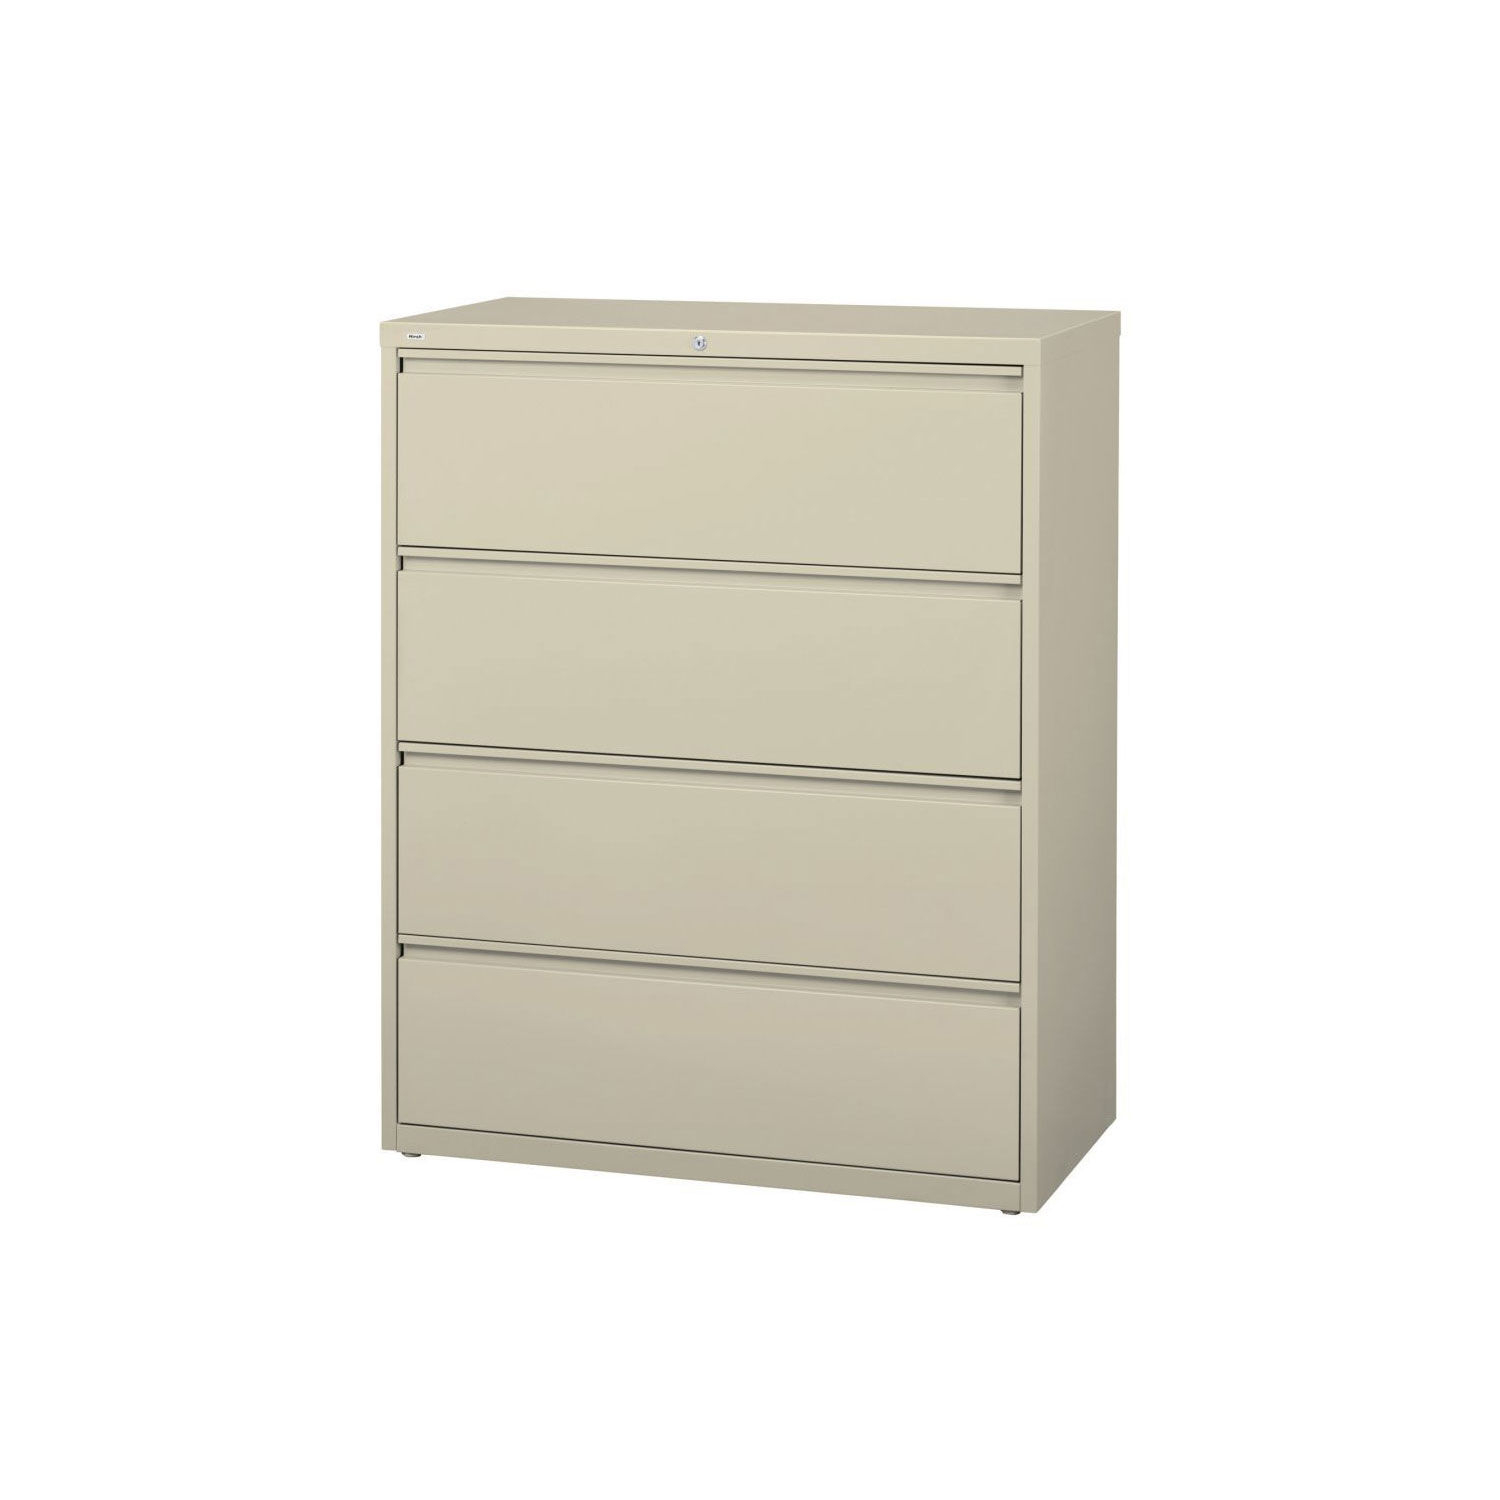 Lorell Llr60444 4 Drawer Lateral File Cabinet 36w X 18 58d X 52 within sizing 1500 X 1500